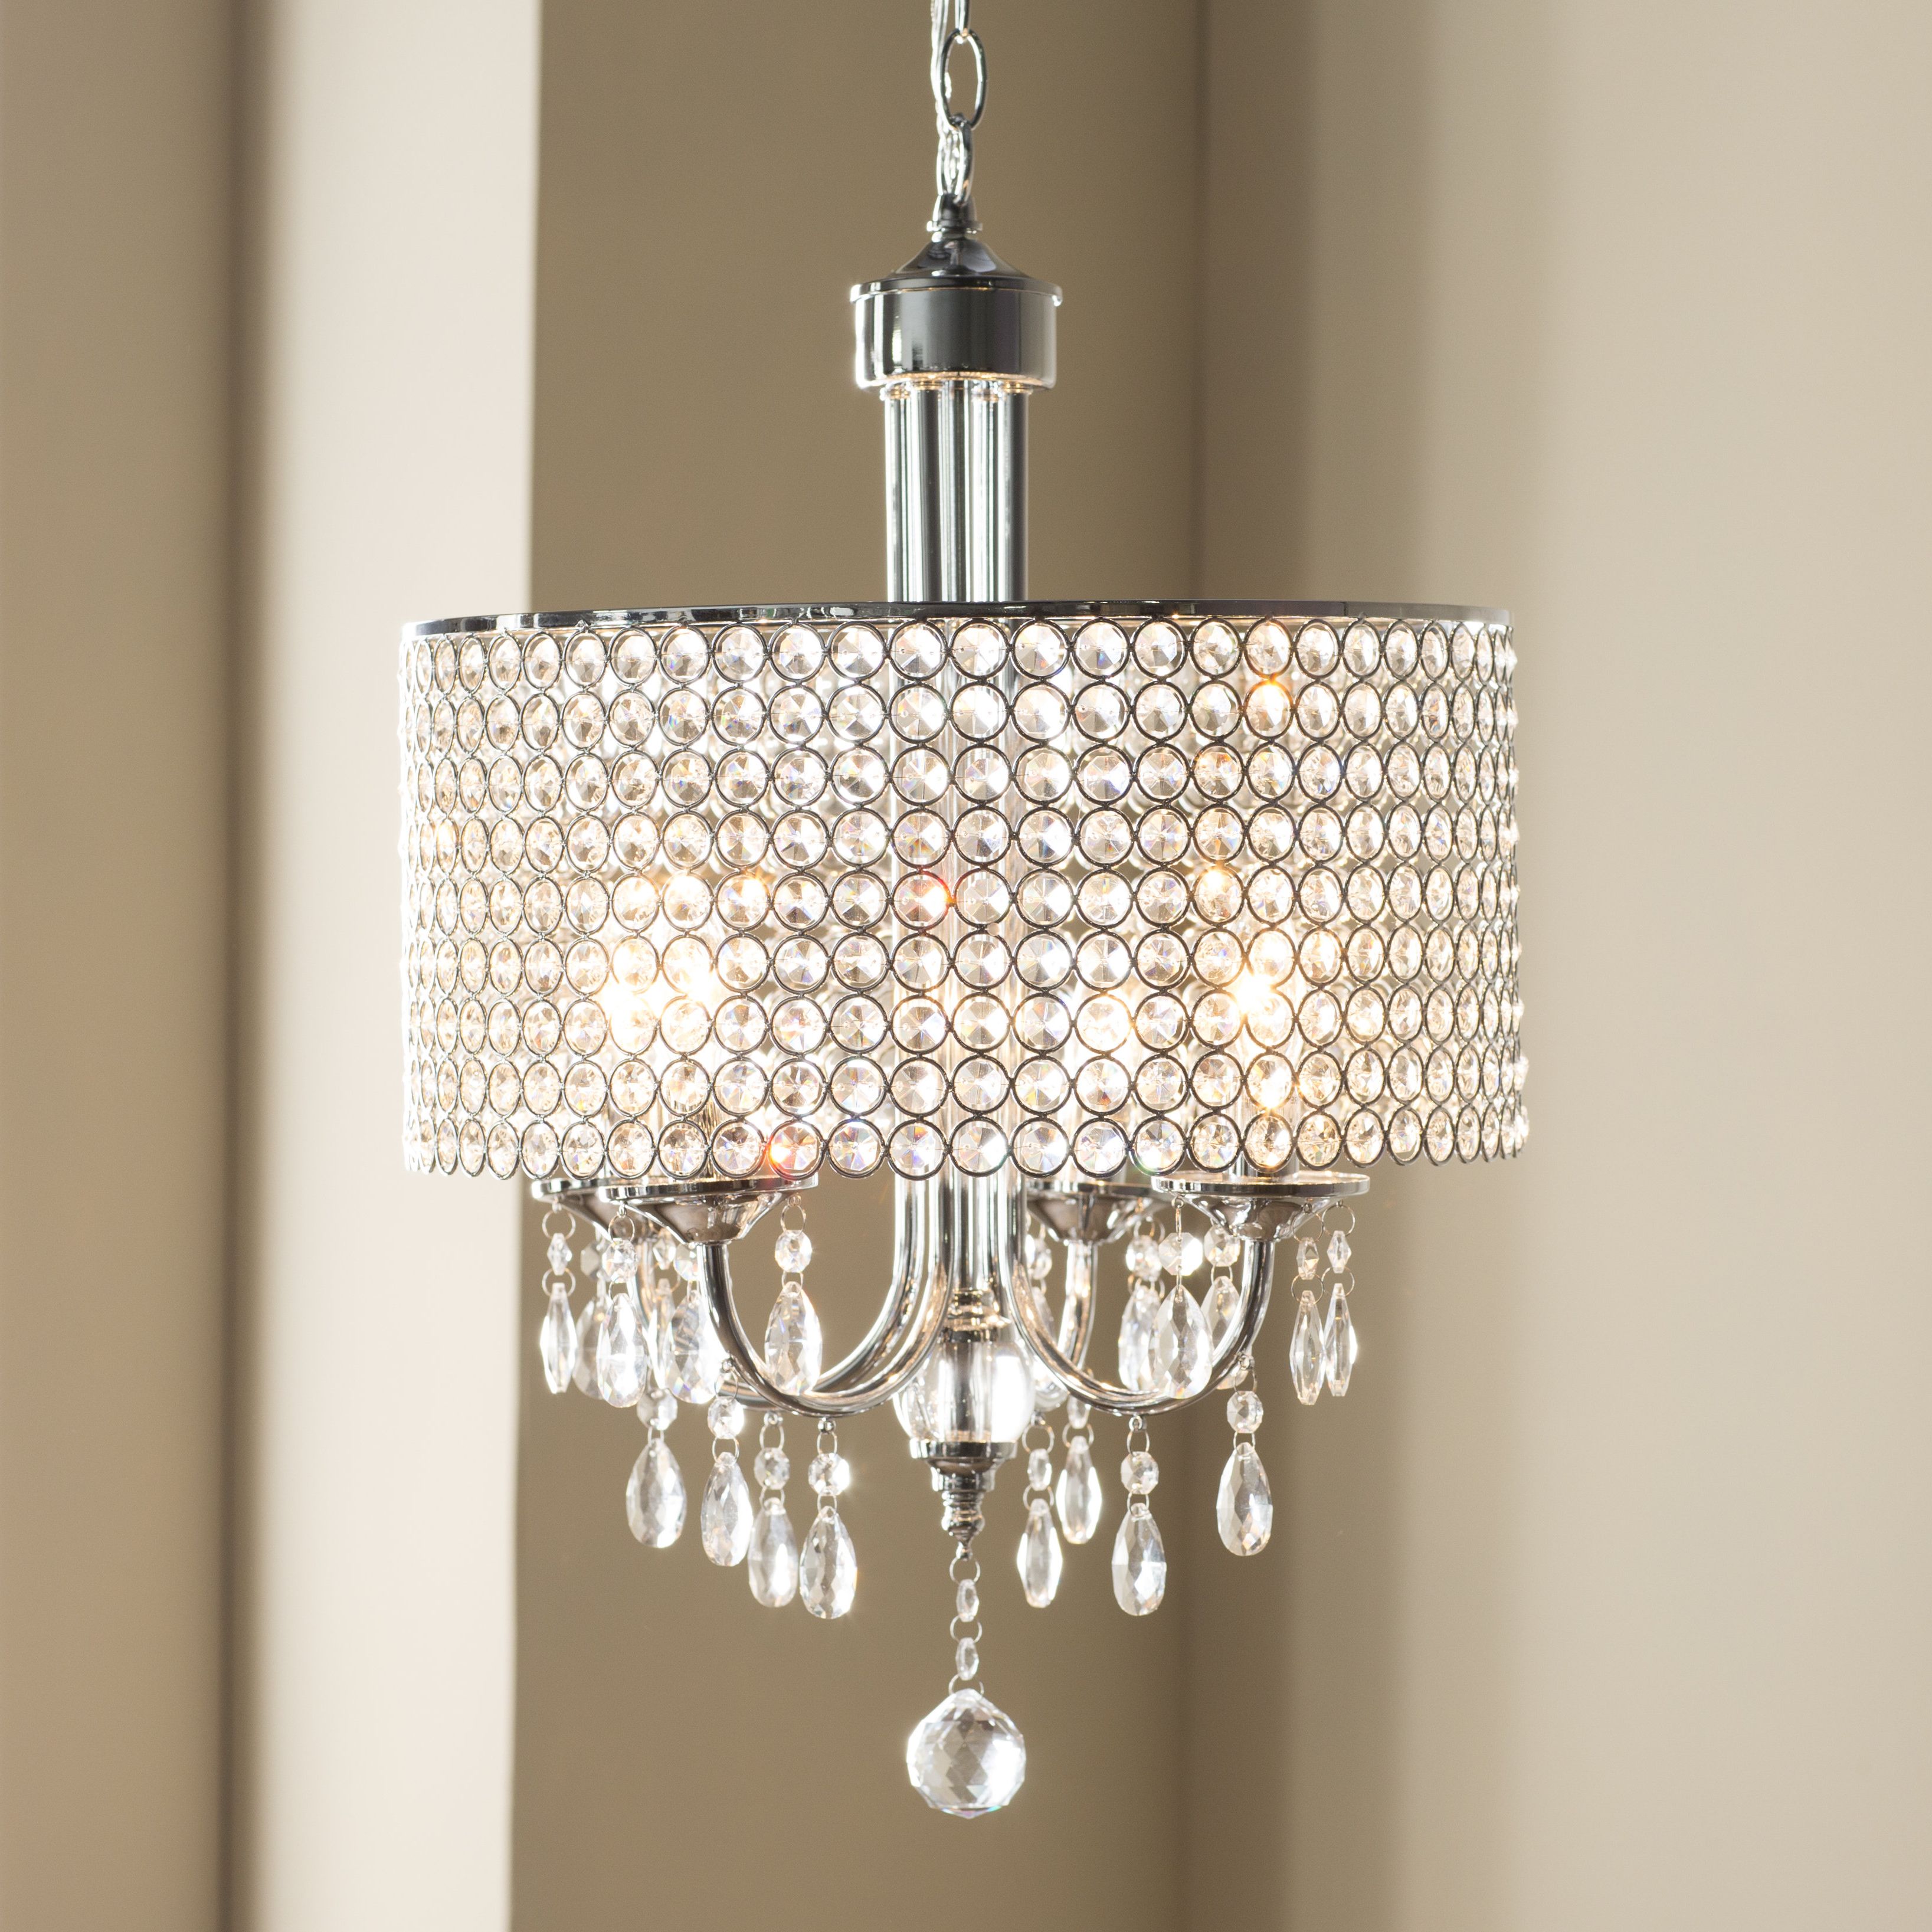 Aurore 4 Light Crystal Chandeliers In Latest House Of Hampton Bella 4 Light Crystal Chandelier & Reviews (View 1 of 20)